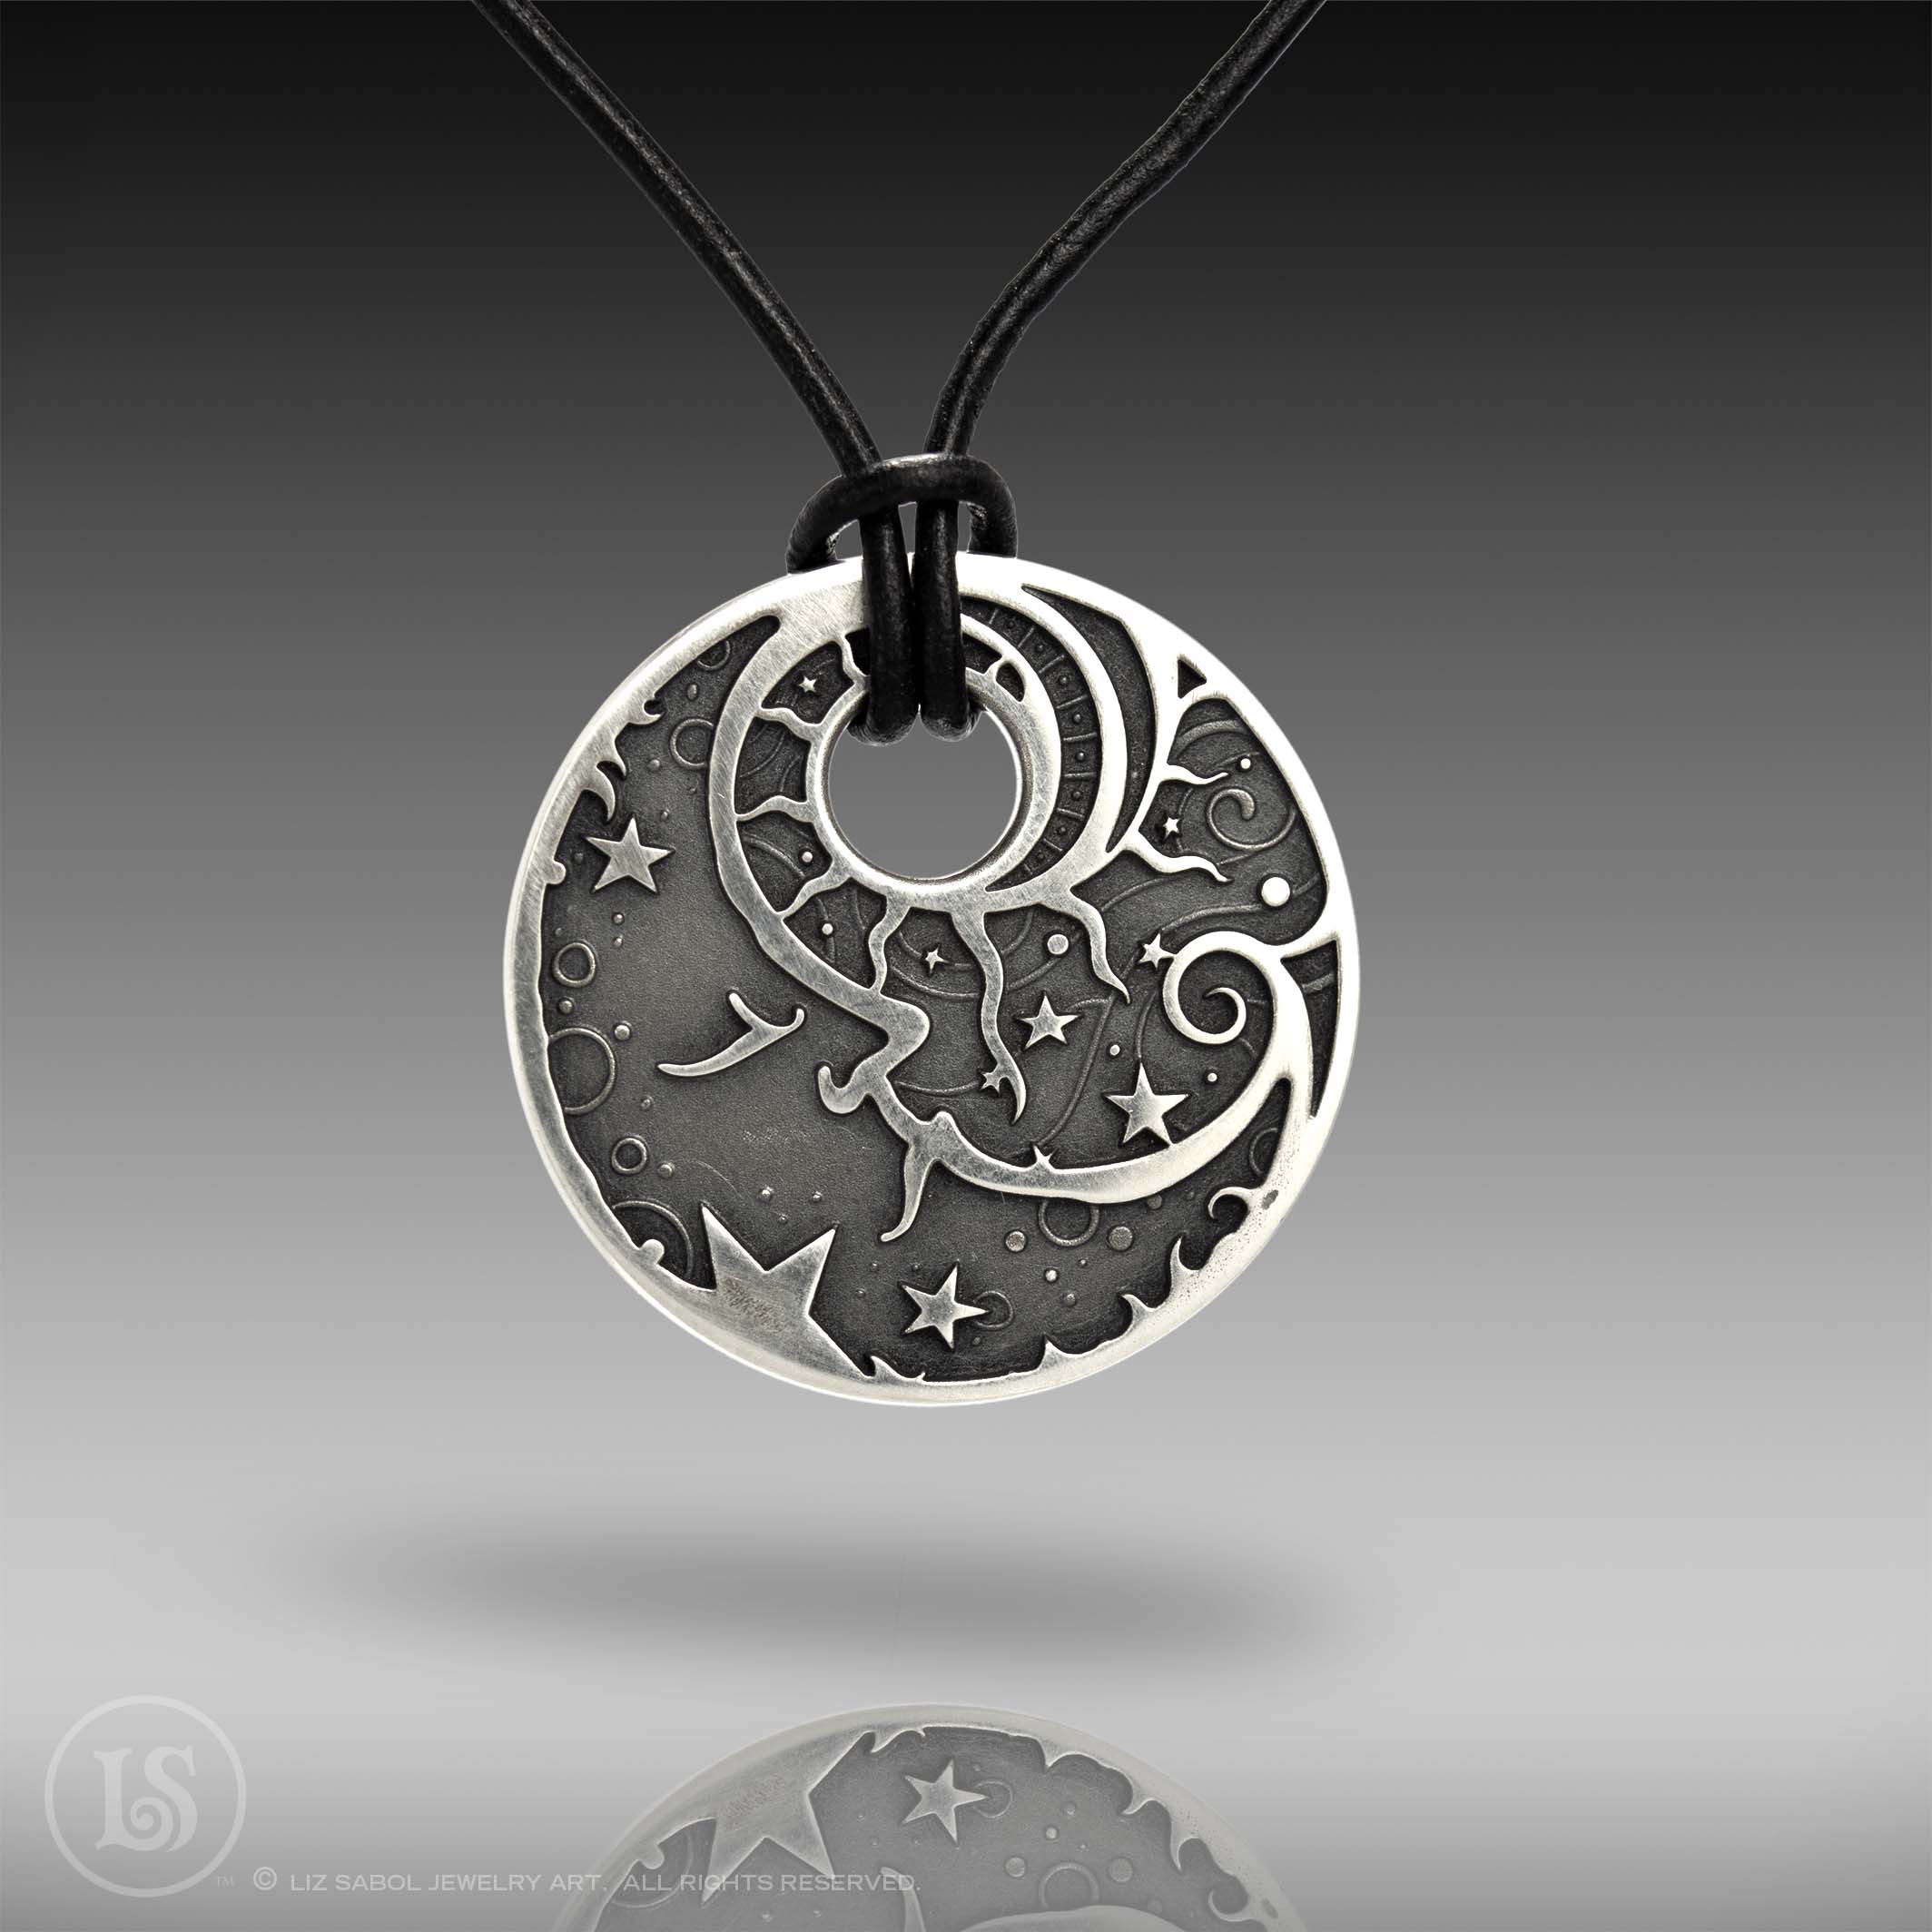 Man in the Moon Black Pendant, Sterling Silver